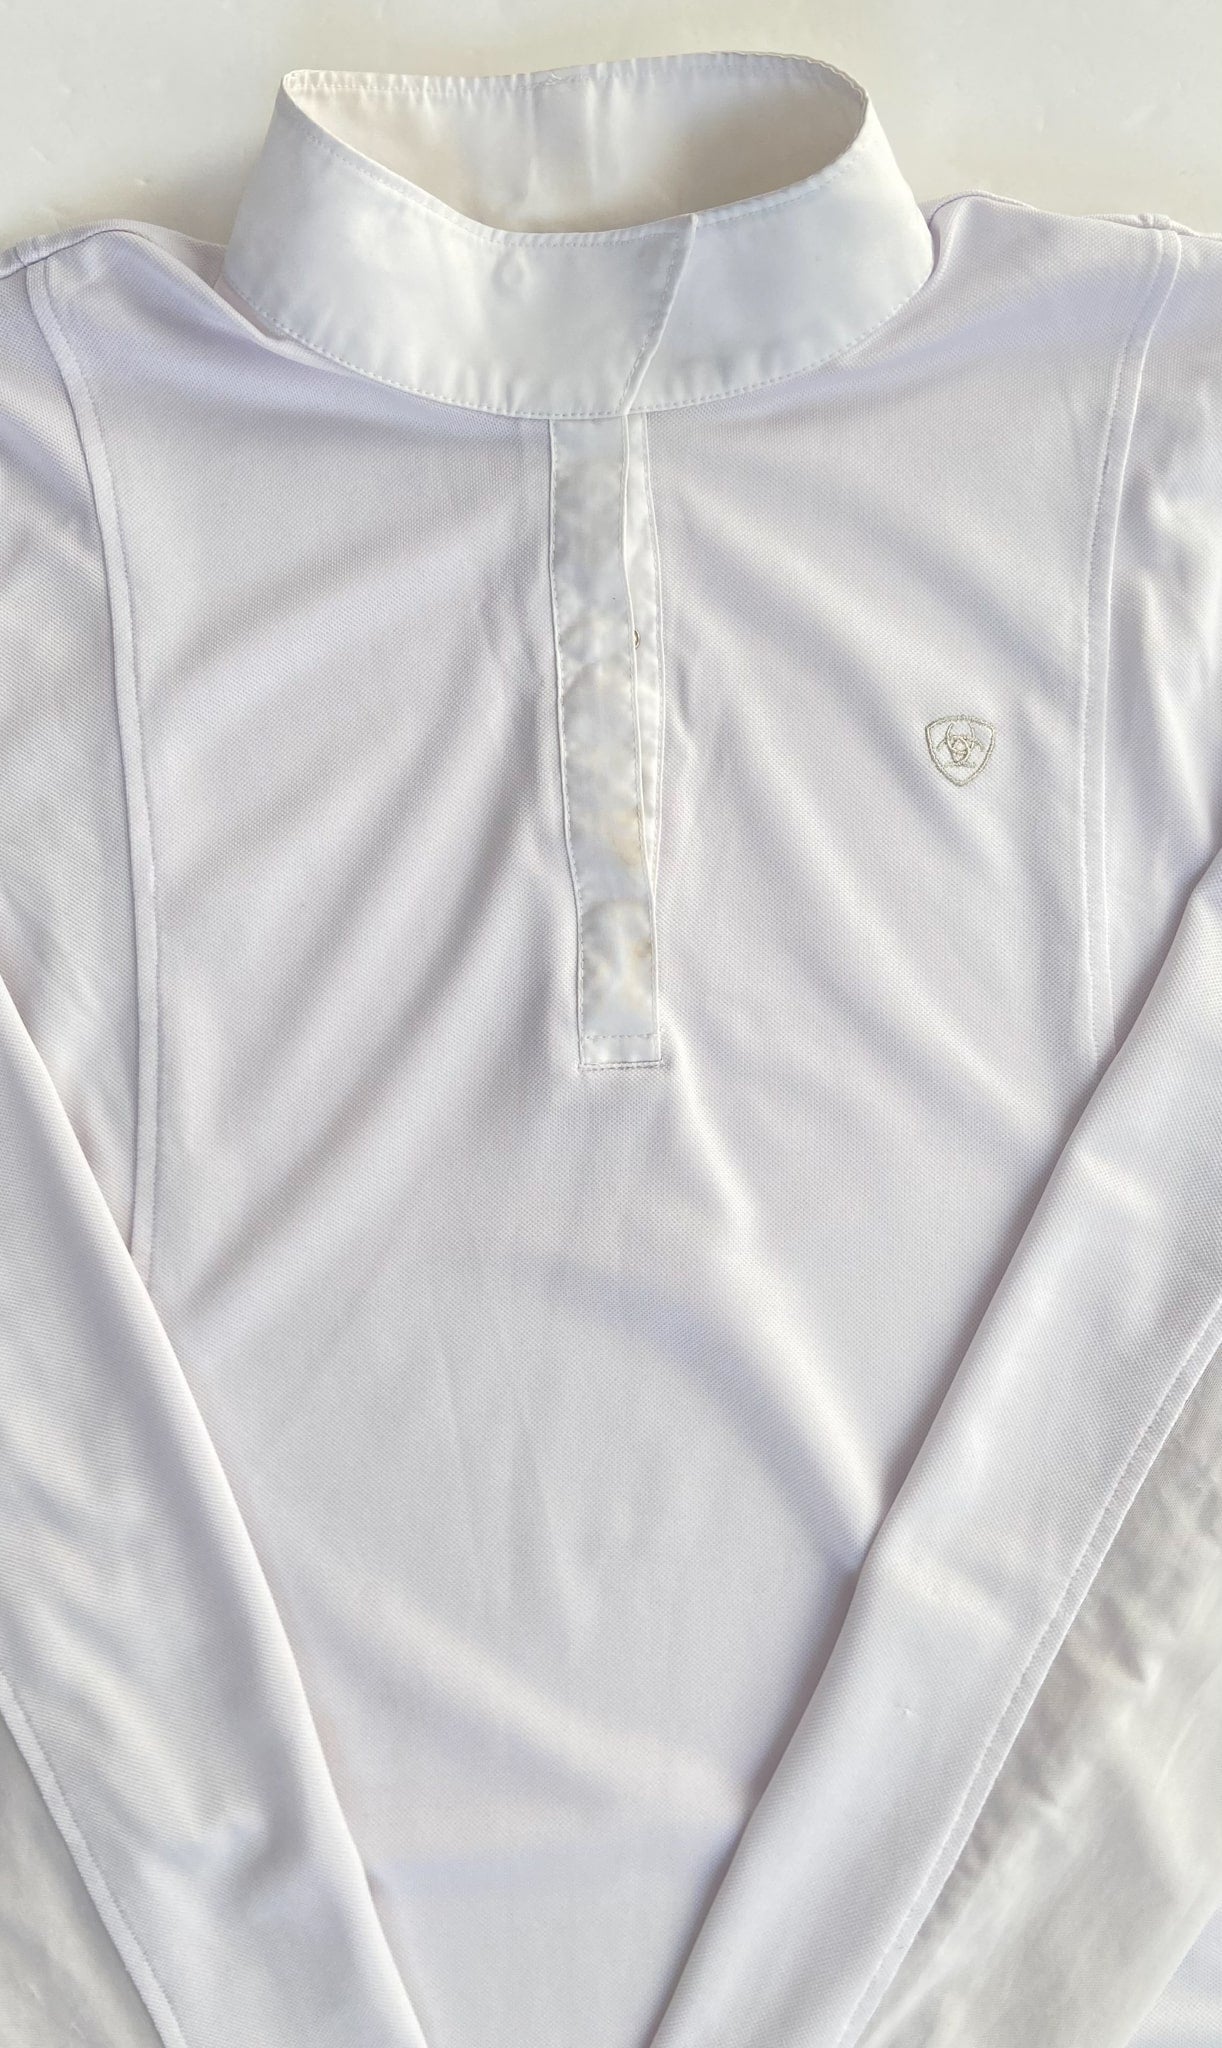 Ariat Pro Series Competition Shirt - White - Women's XL